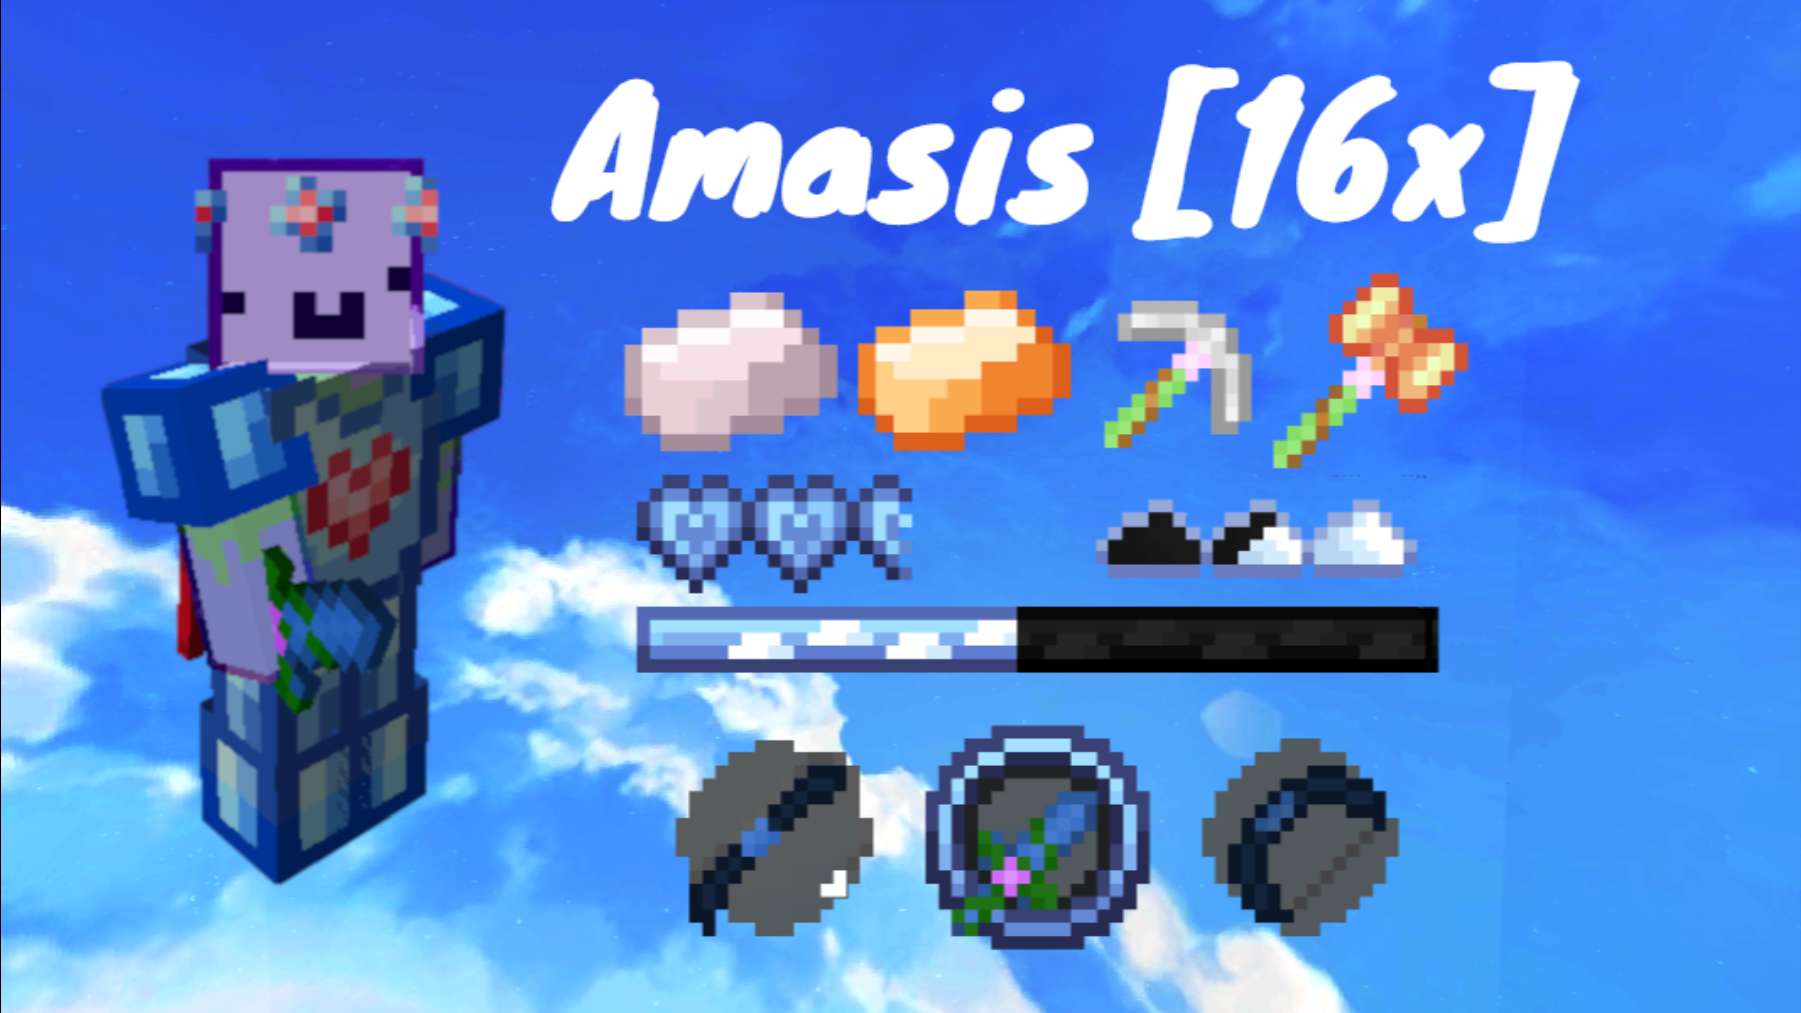 amasis 16x by iwillbrb on PvPRP